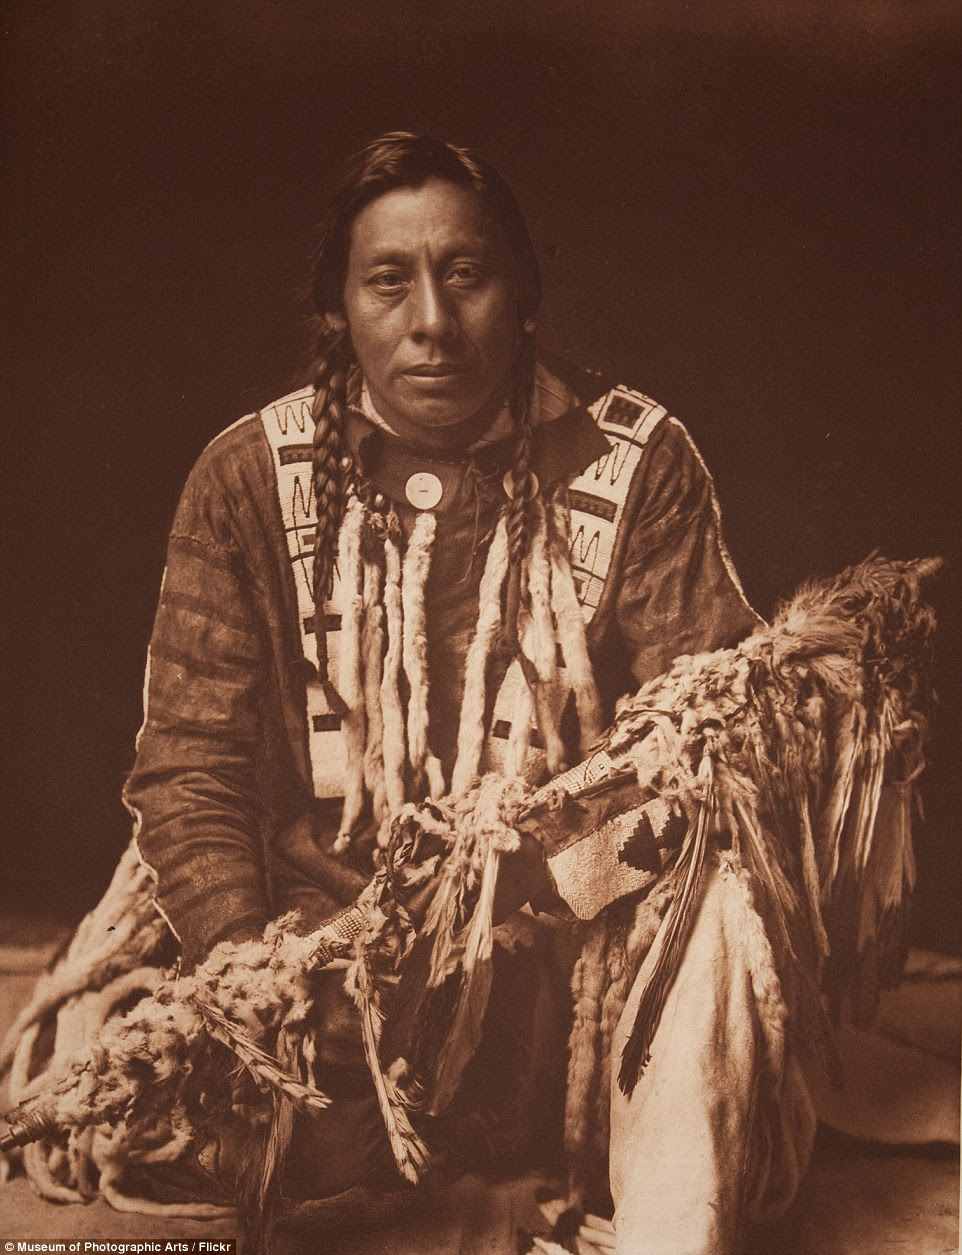 A Piegan man kneels holding medicine pipe described by Curtis as 'long pipe-stems variously decorated with beads, paint, feathers, and fur'